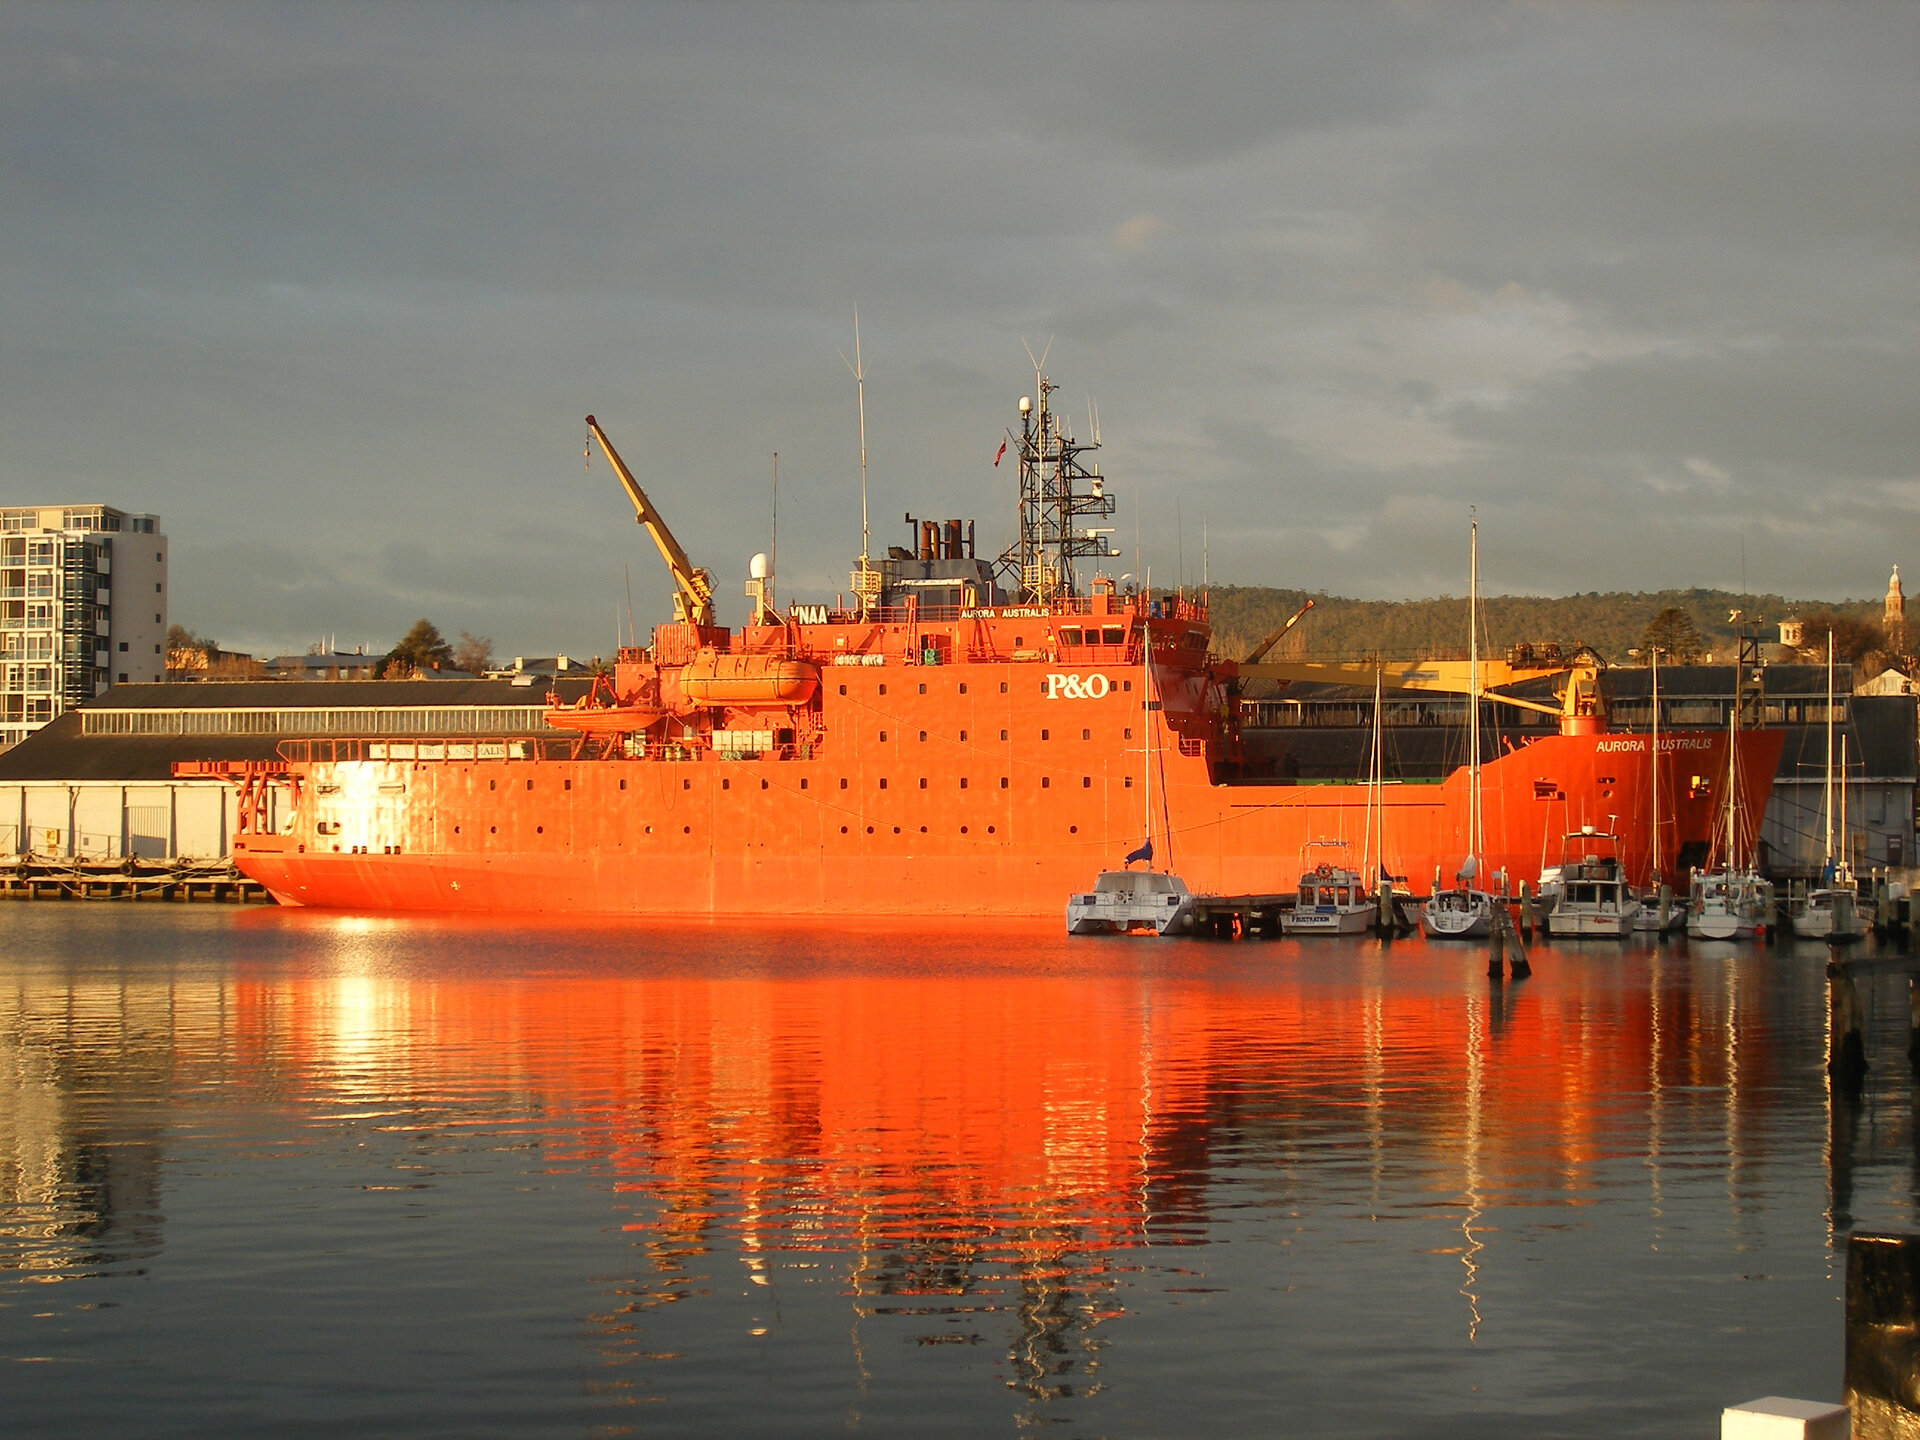 Aurora Australis used for research into sea-ice thickness